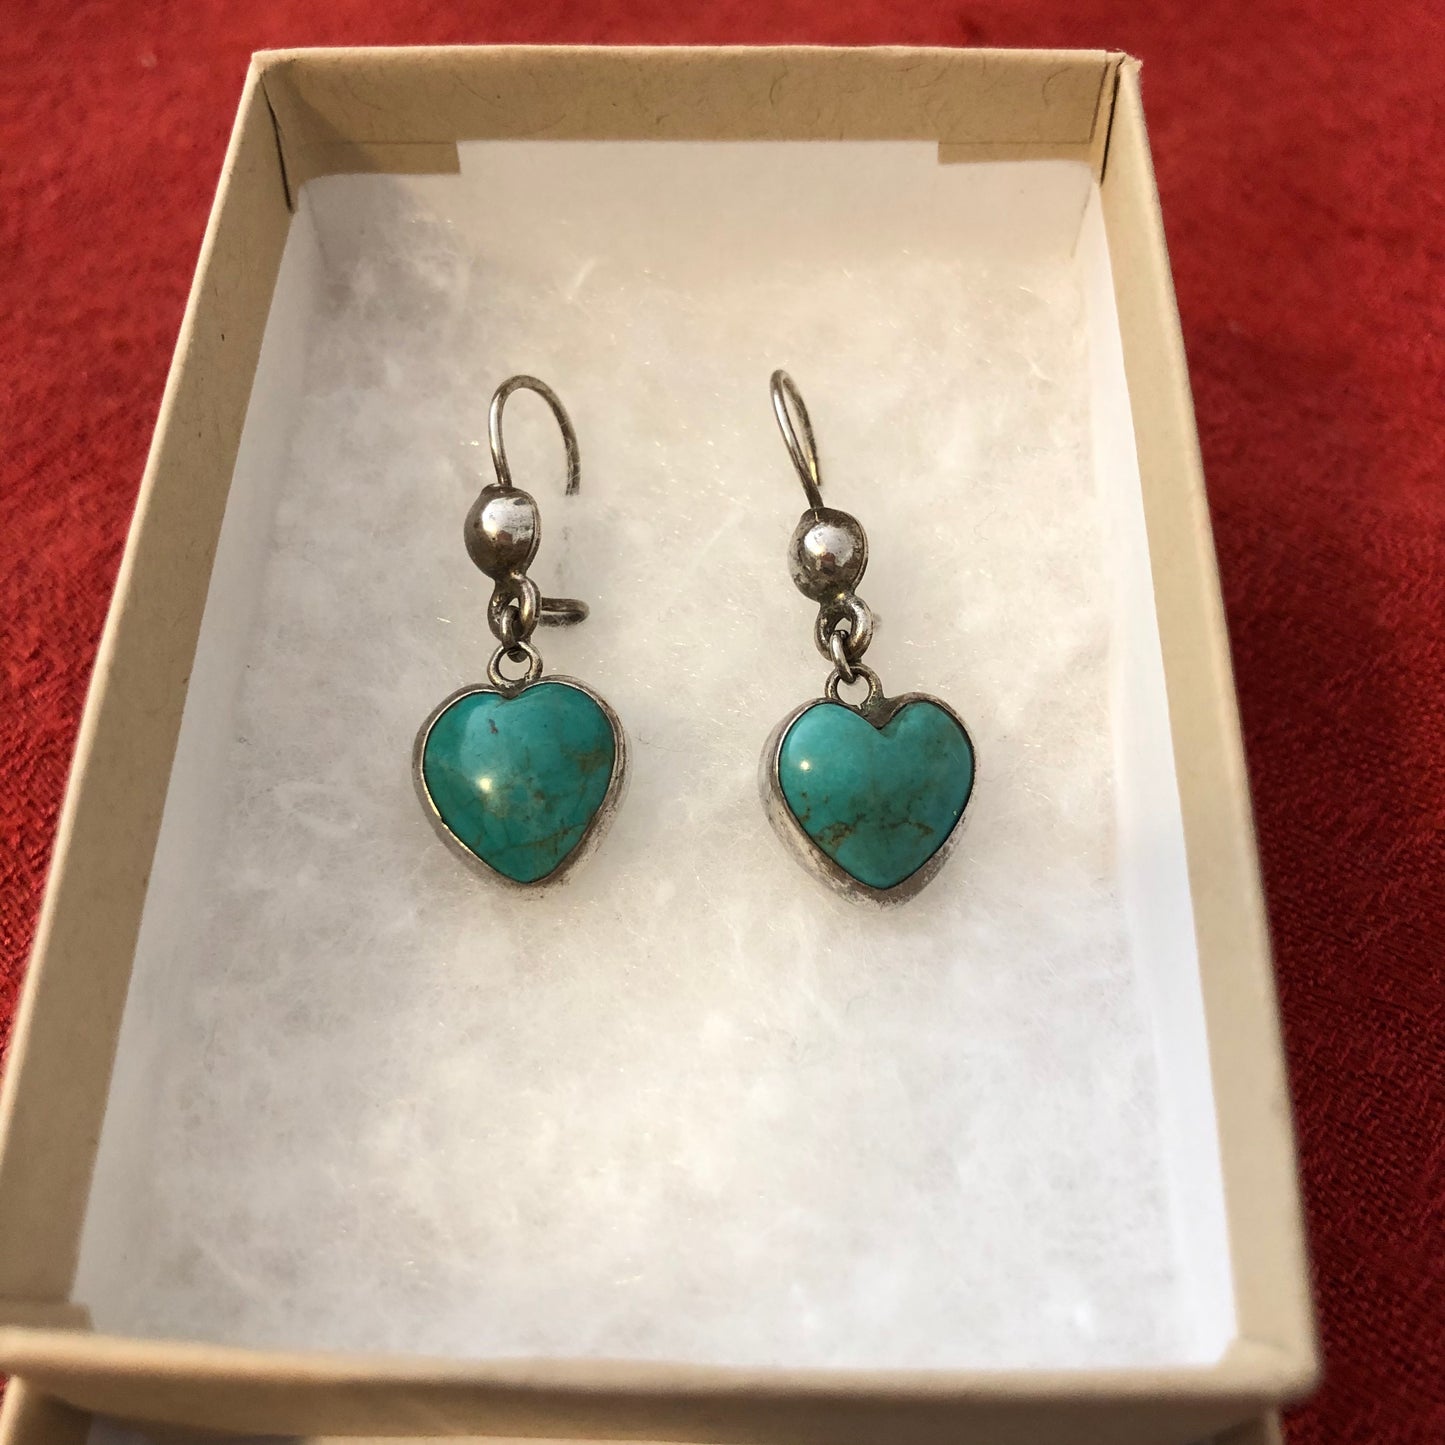 Heart-Shaped Turquoise and Sterling Earrings